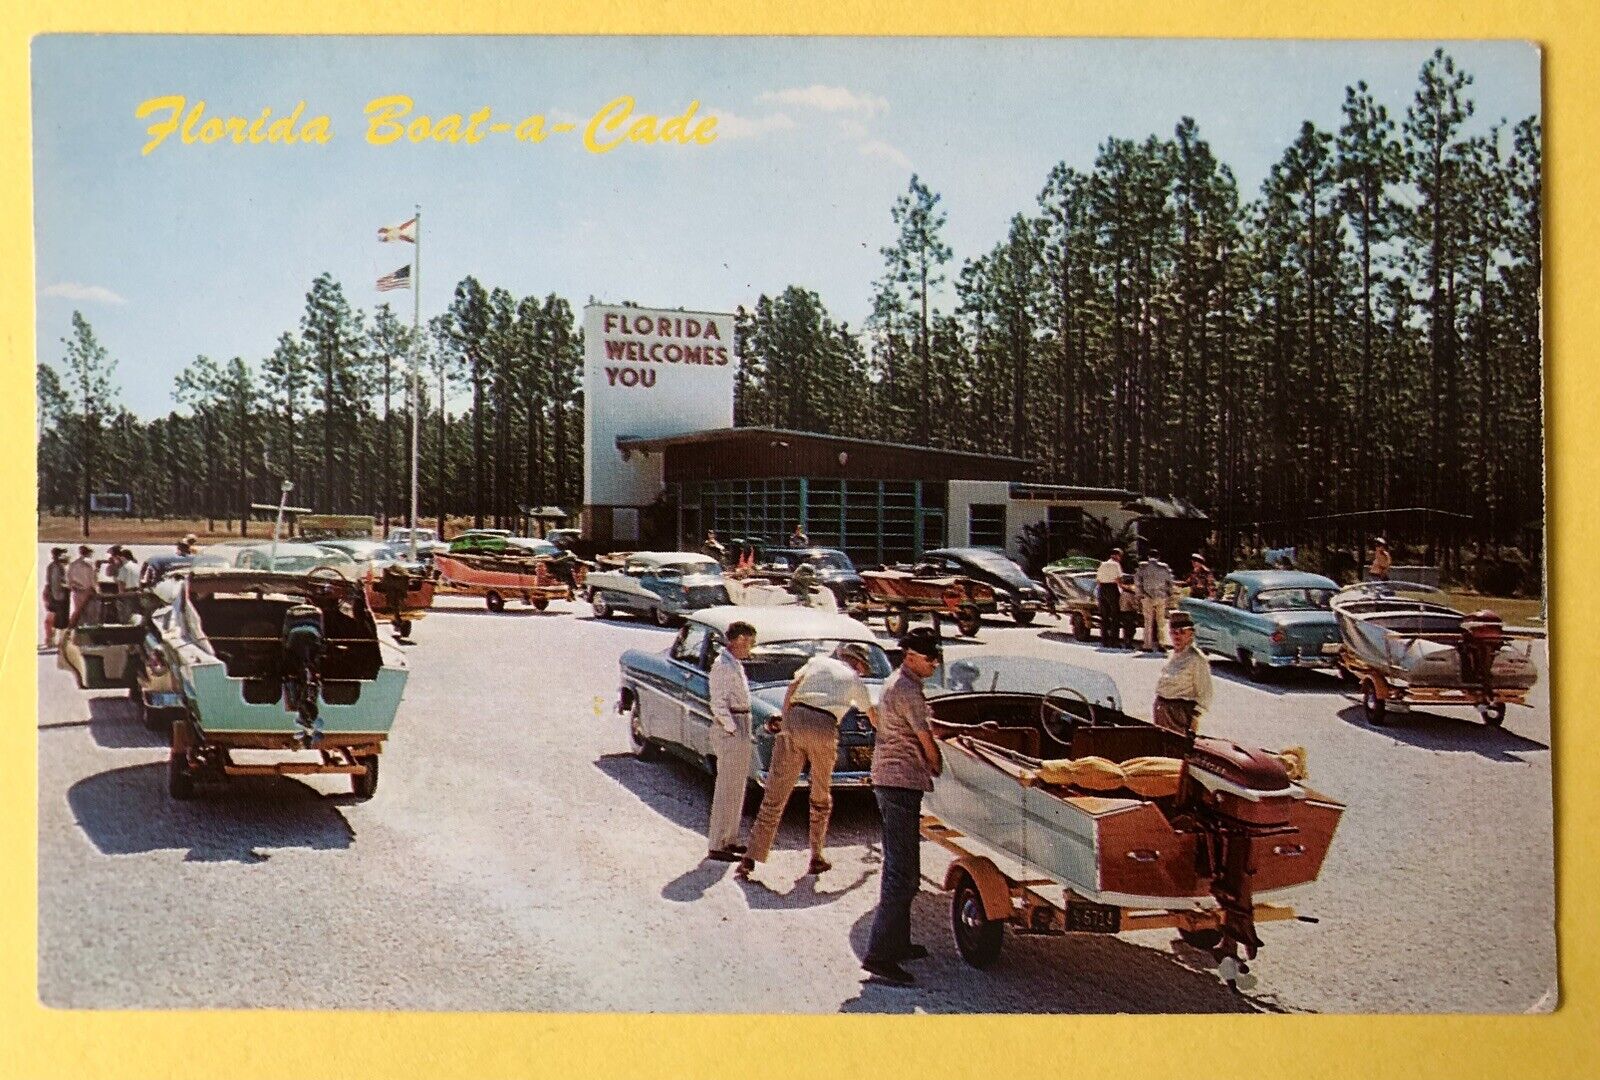 Vintage Postcard 1950s Florida￼ Welcomes You Boat-A-Cade FL Auto Cars Boats